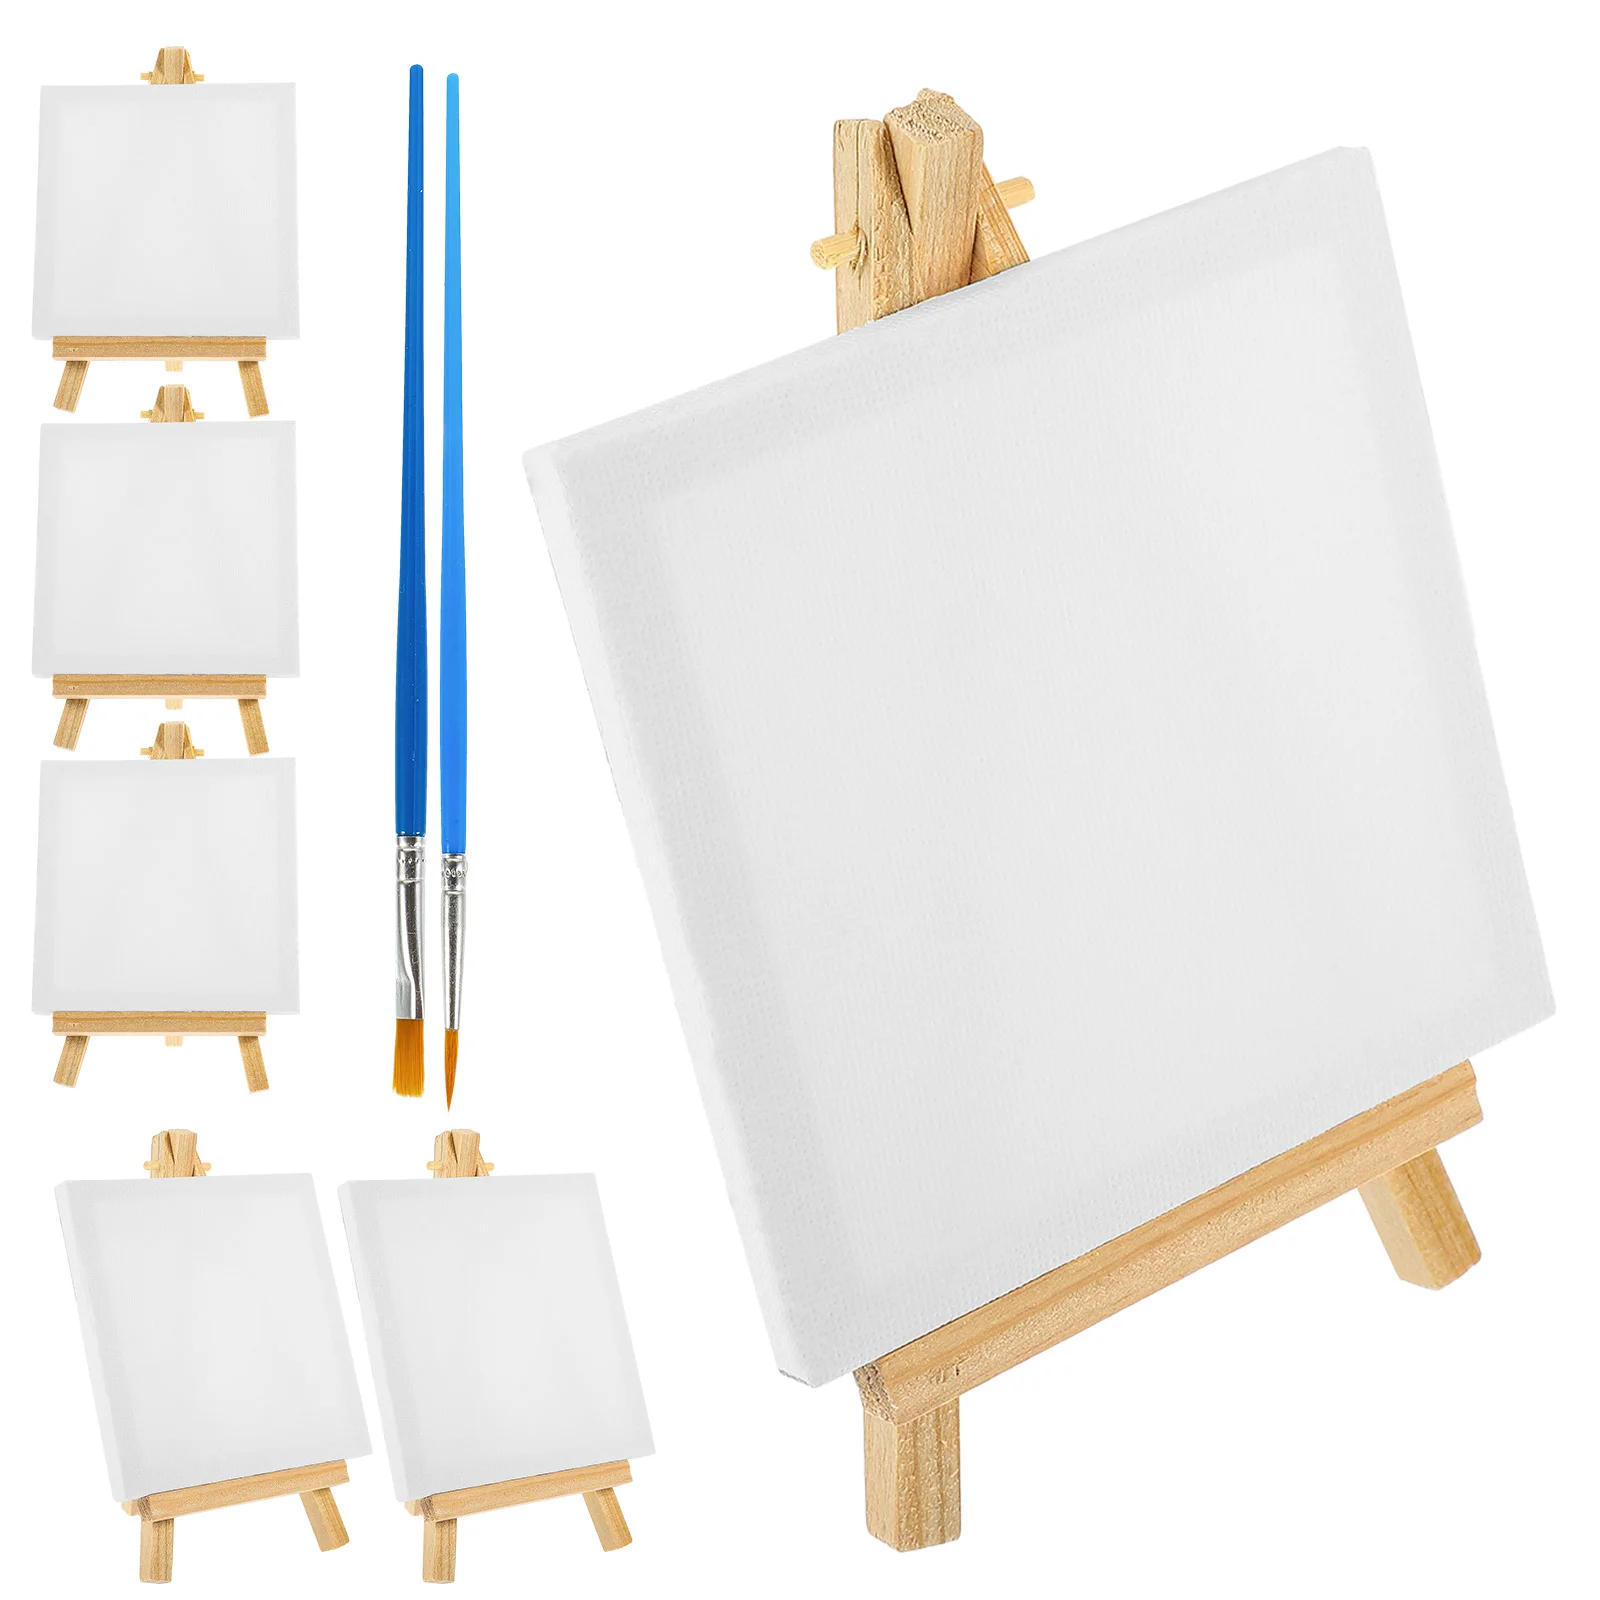 Miniature Kit Oil Easel Canvas Painting for Kids Small Bracket Adults Supplies Child miniature kit oil easel canvas painting for kids small bracket adults supplies child